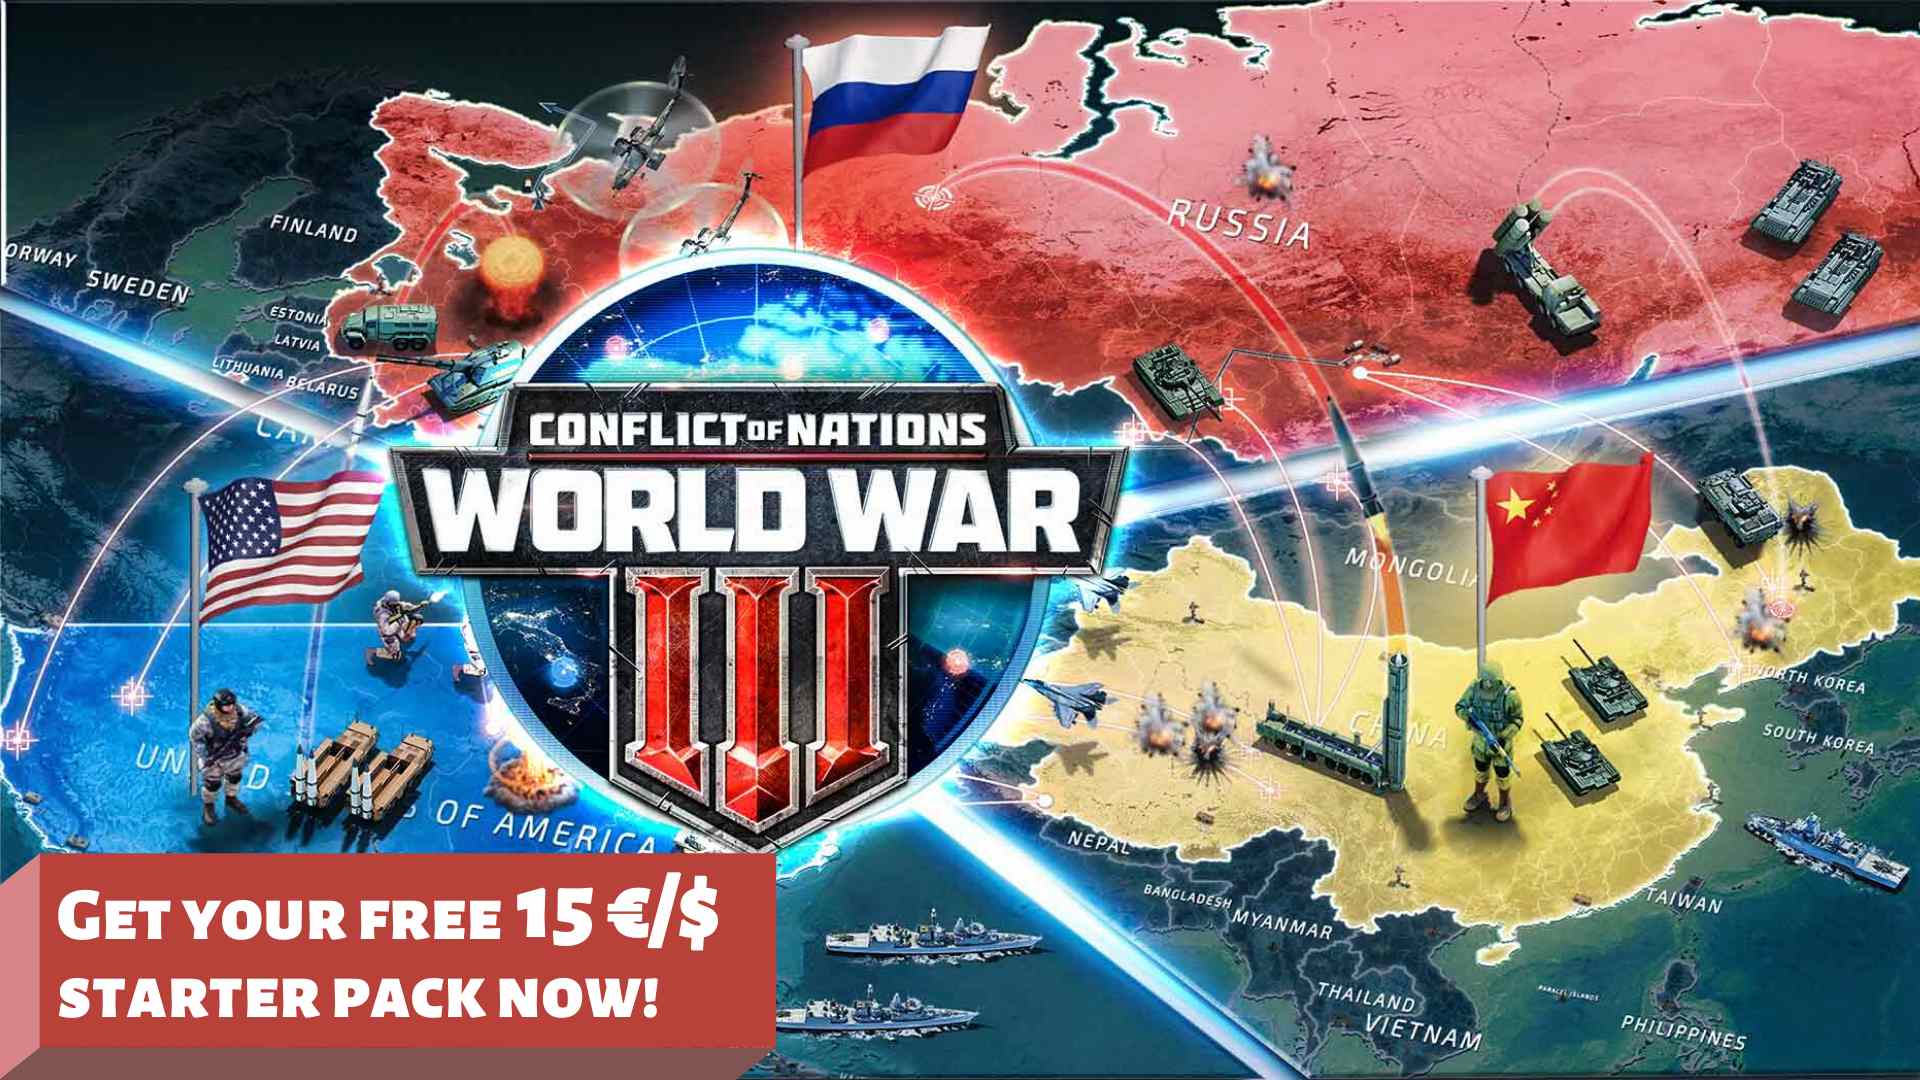 Conflict of Nations WWIII Starter Pack here on F2P.com